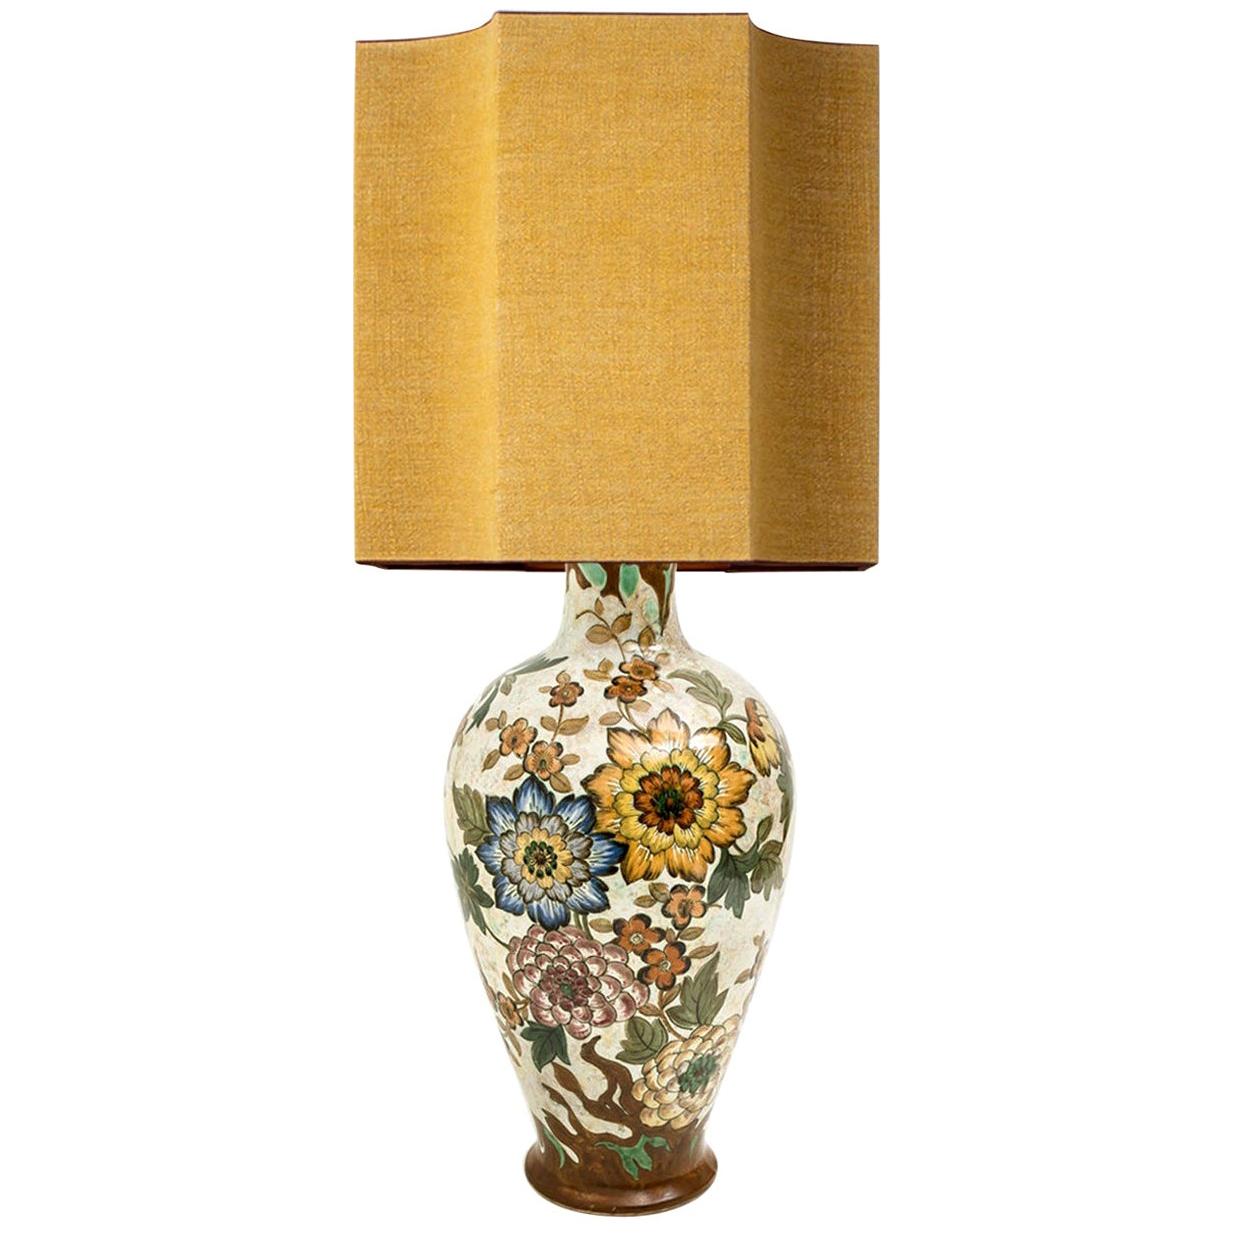 Large Gouda Royal Table Lamp with Silk Shade by R Houben, Hand Painted, 1930